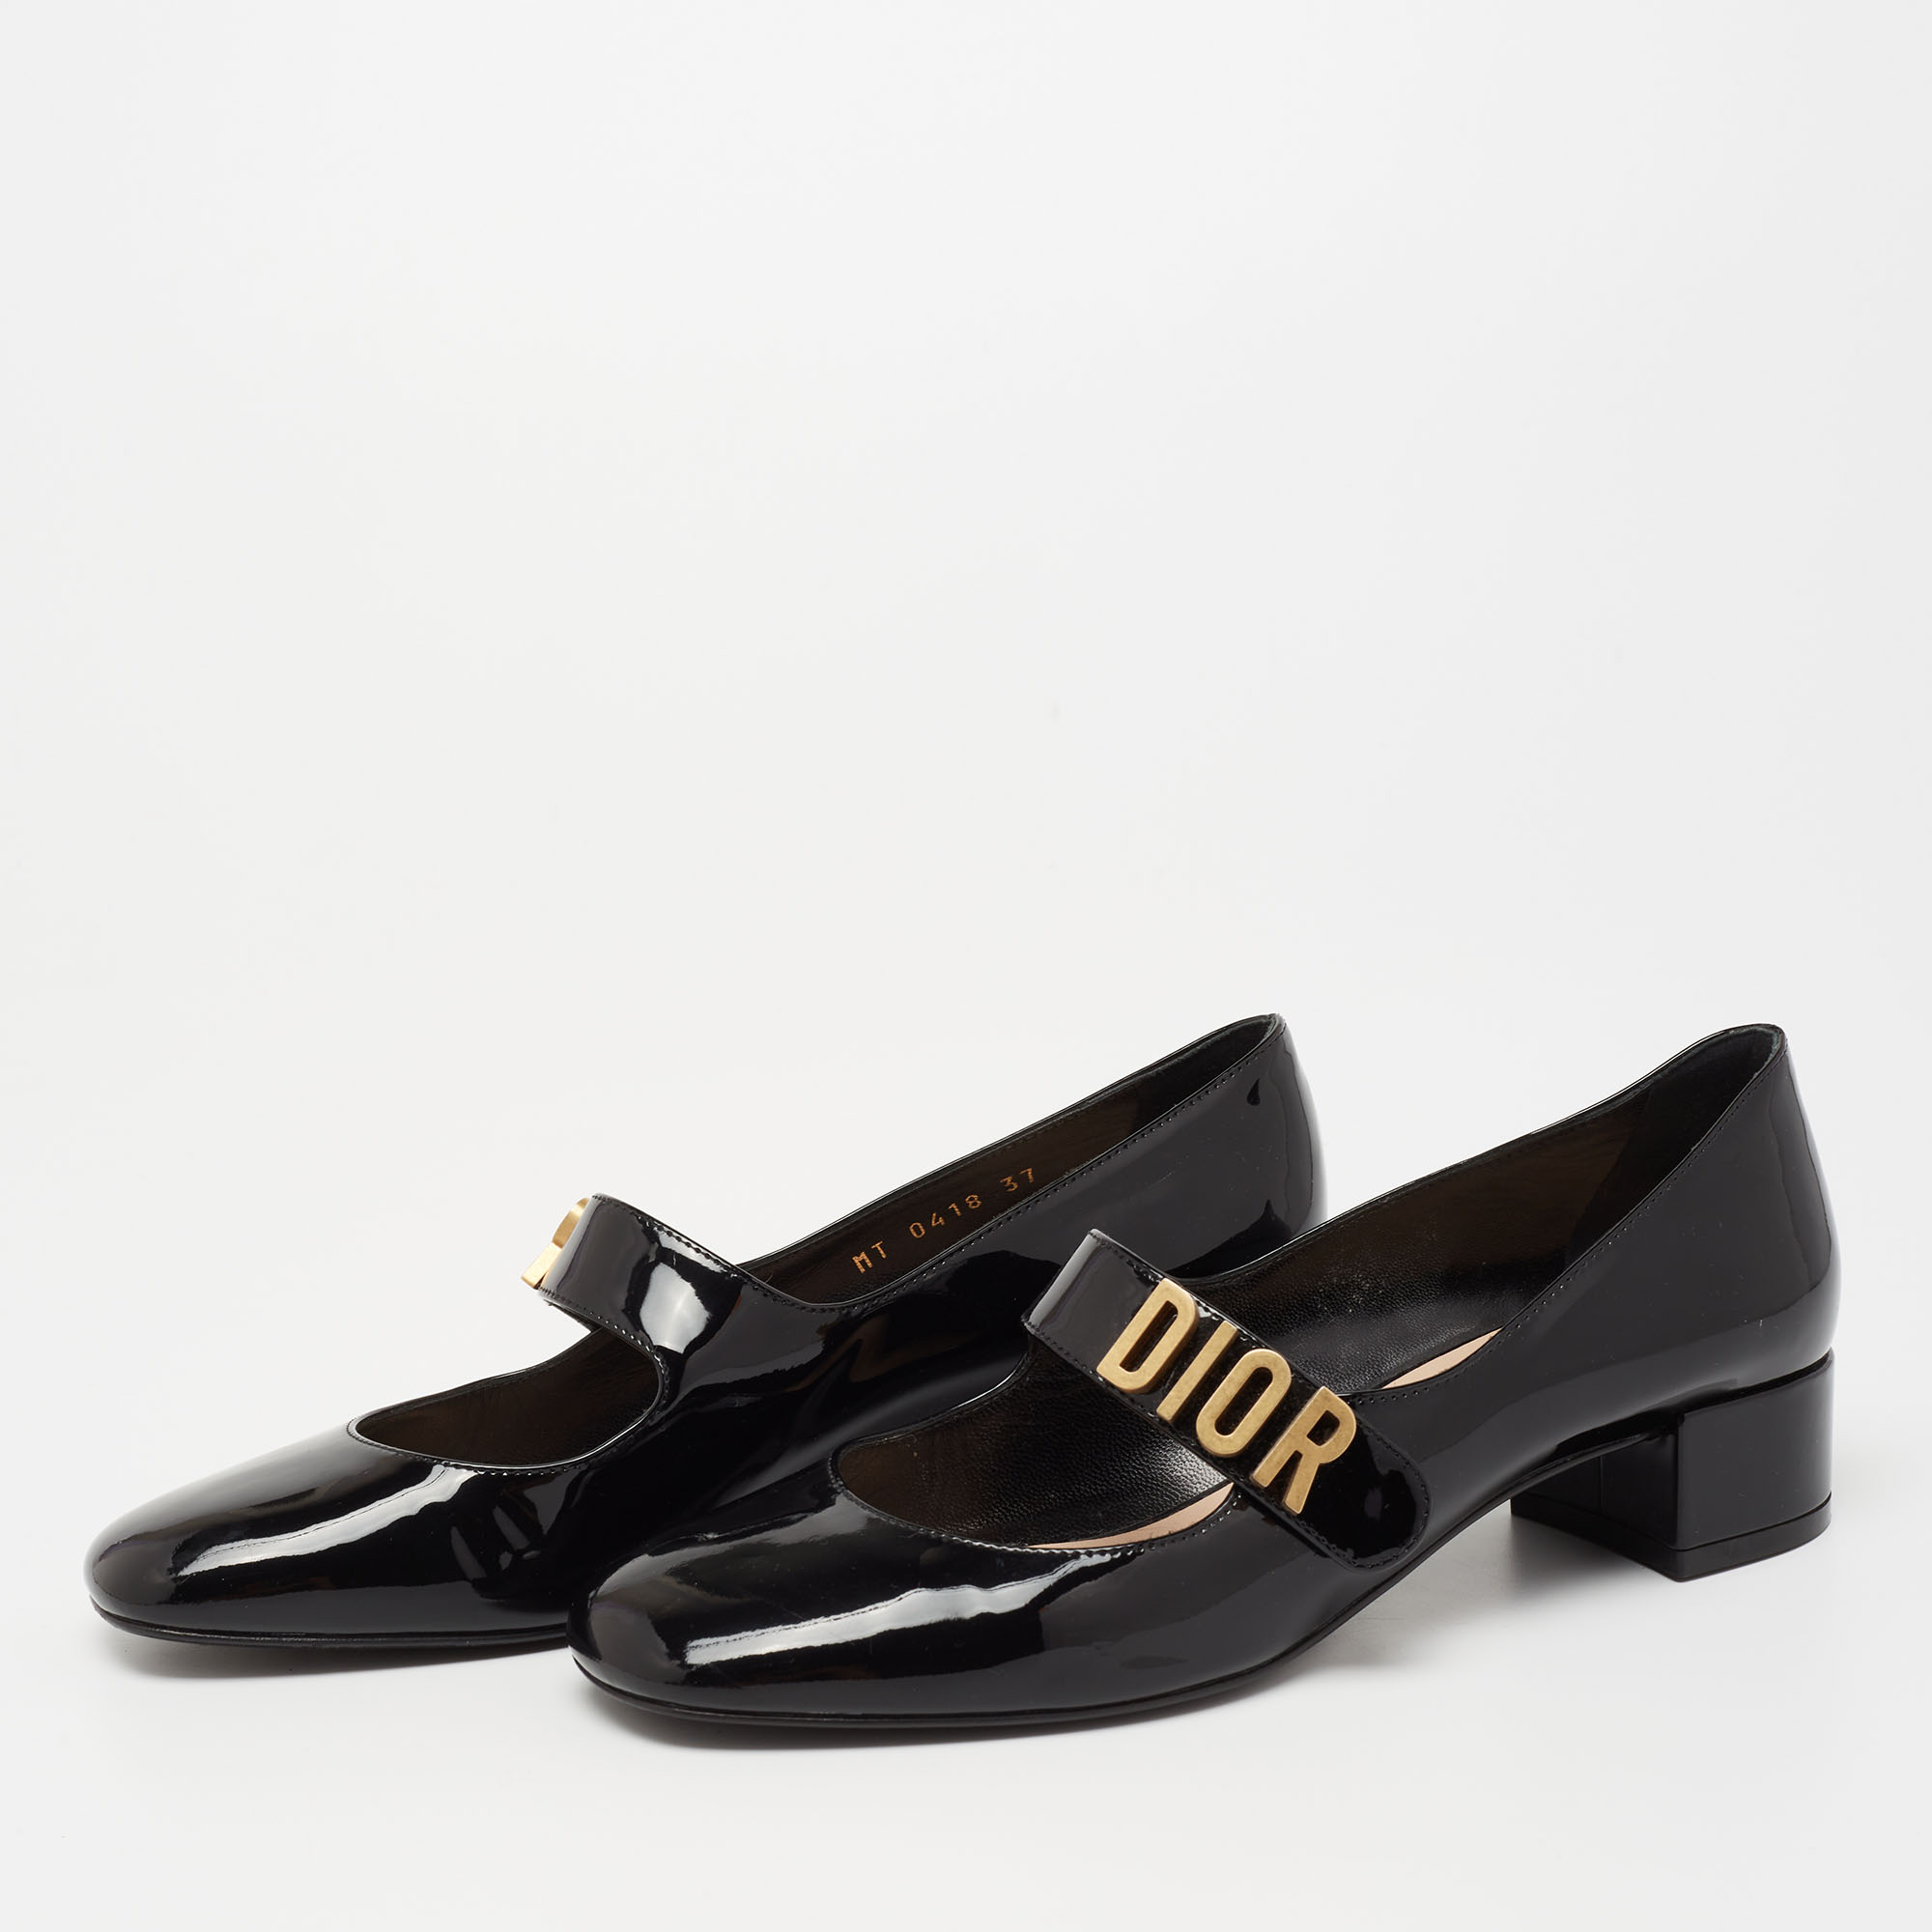 

Dior Black Patent Leather Baby D Mary Jane Pumps Size